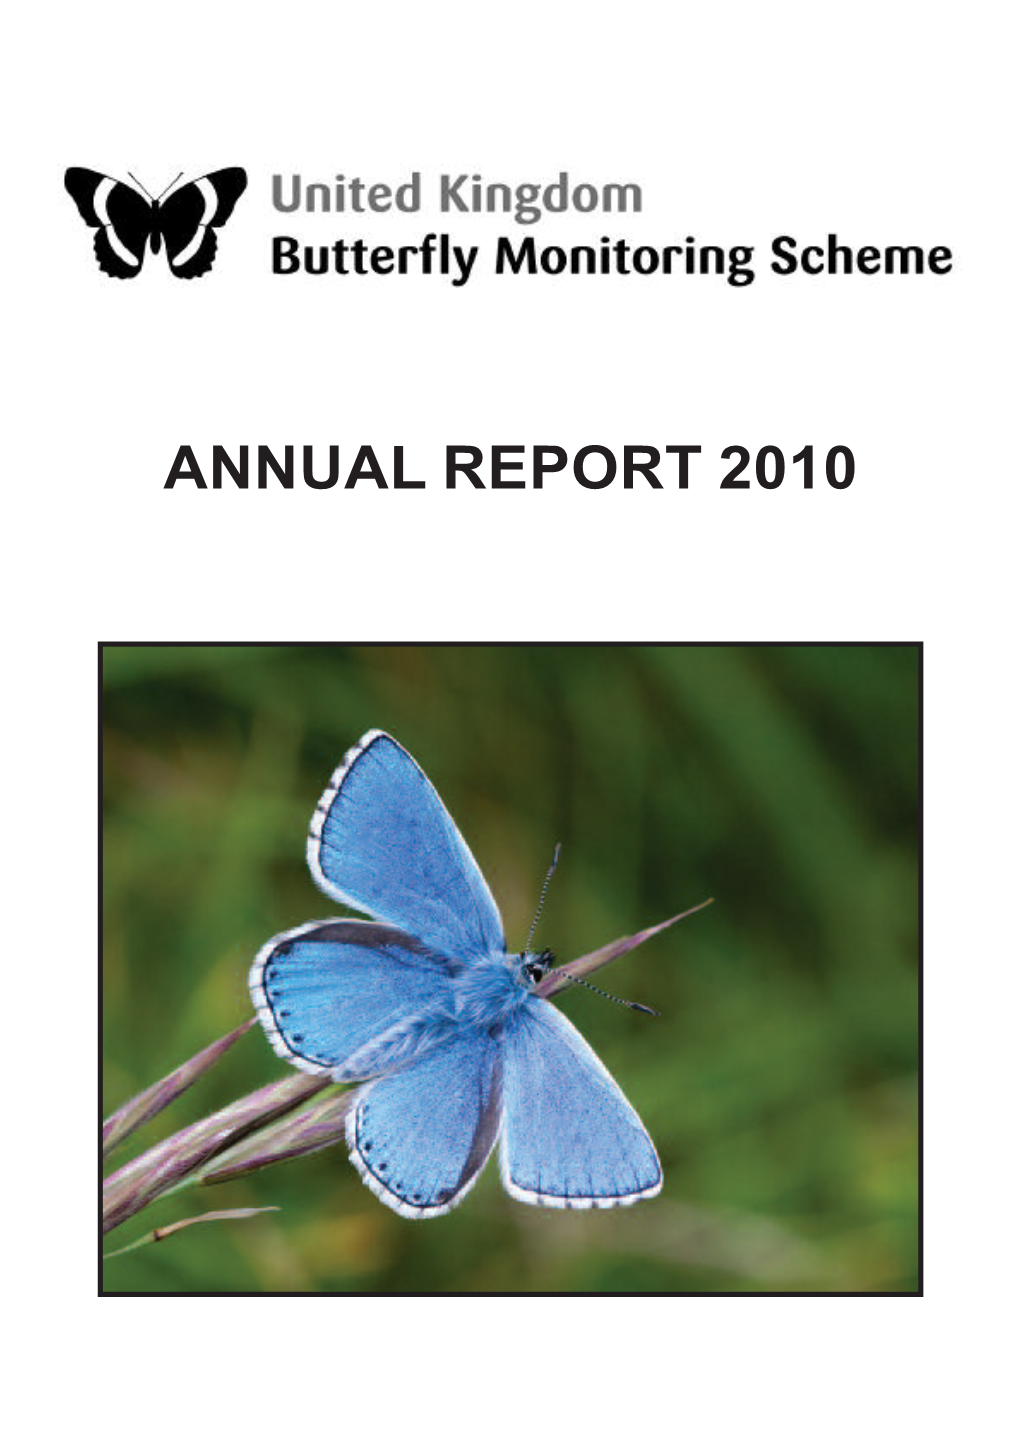 ANNUAL REPORT 2010 Tracking Changes in the Abundance of UK Butterflies